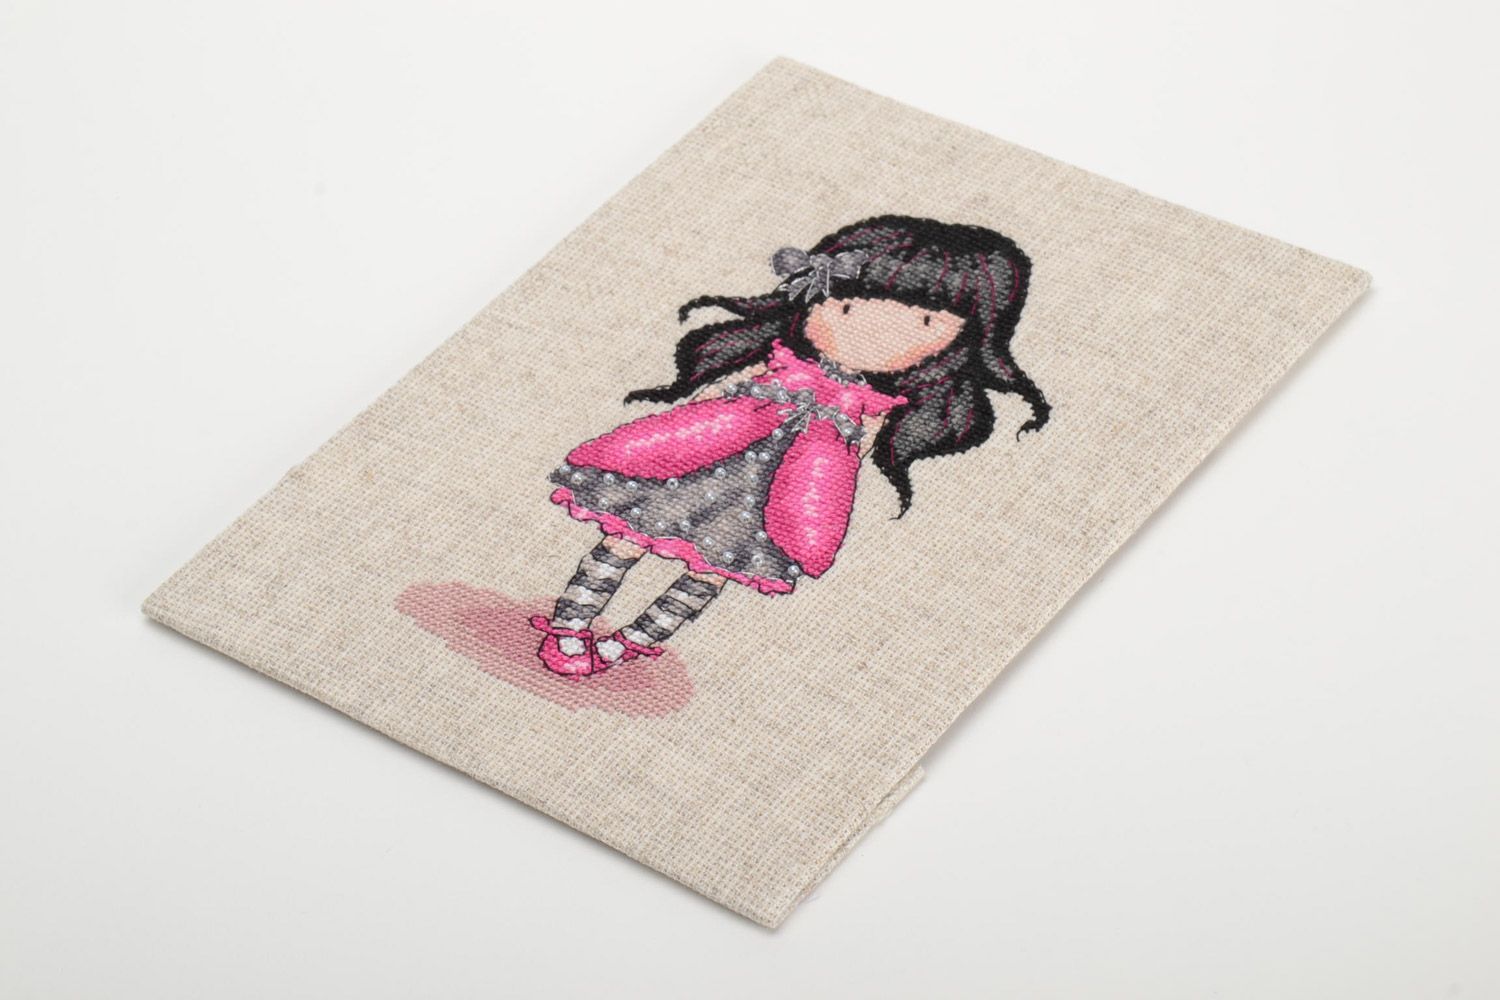 Handmade picture embroidered on linen canvas Girl in Dress for interior decoration photo 5